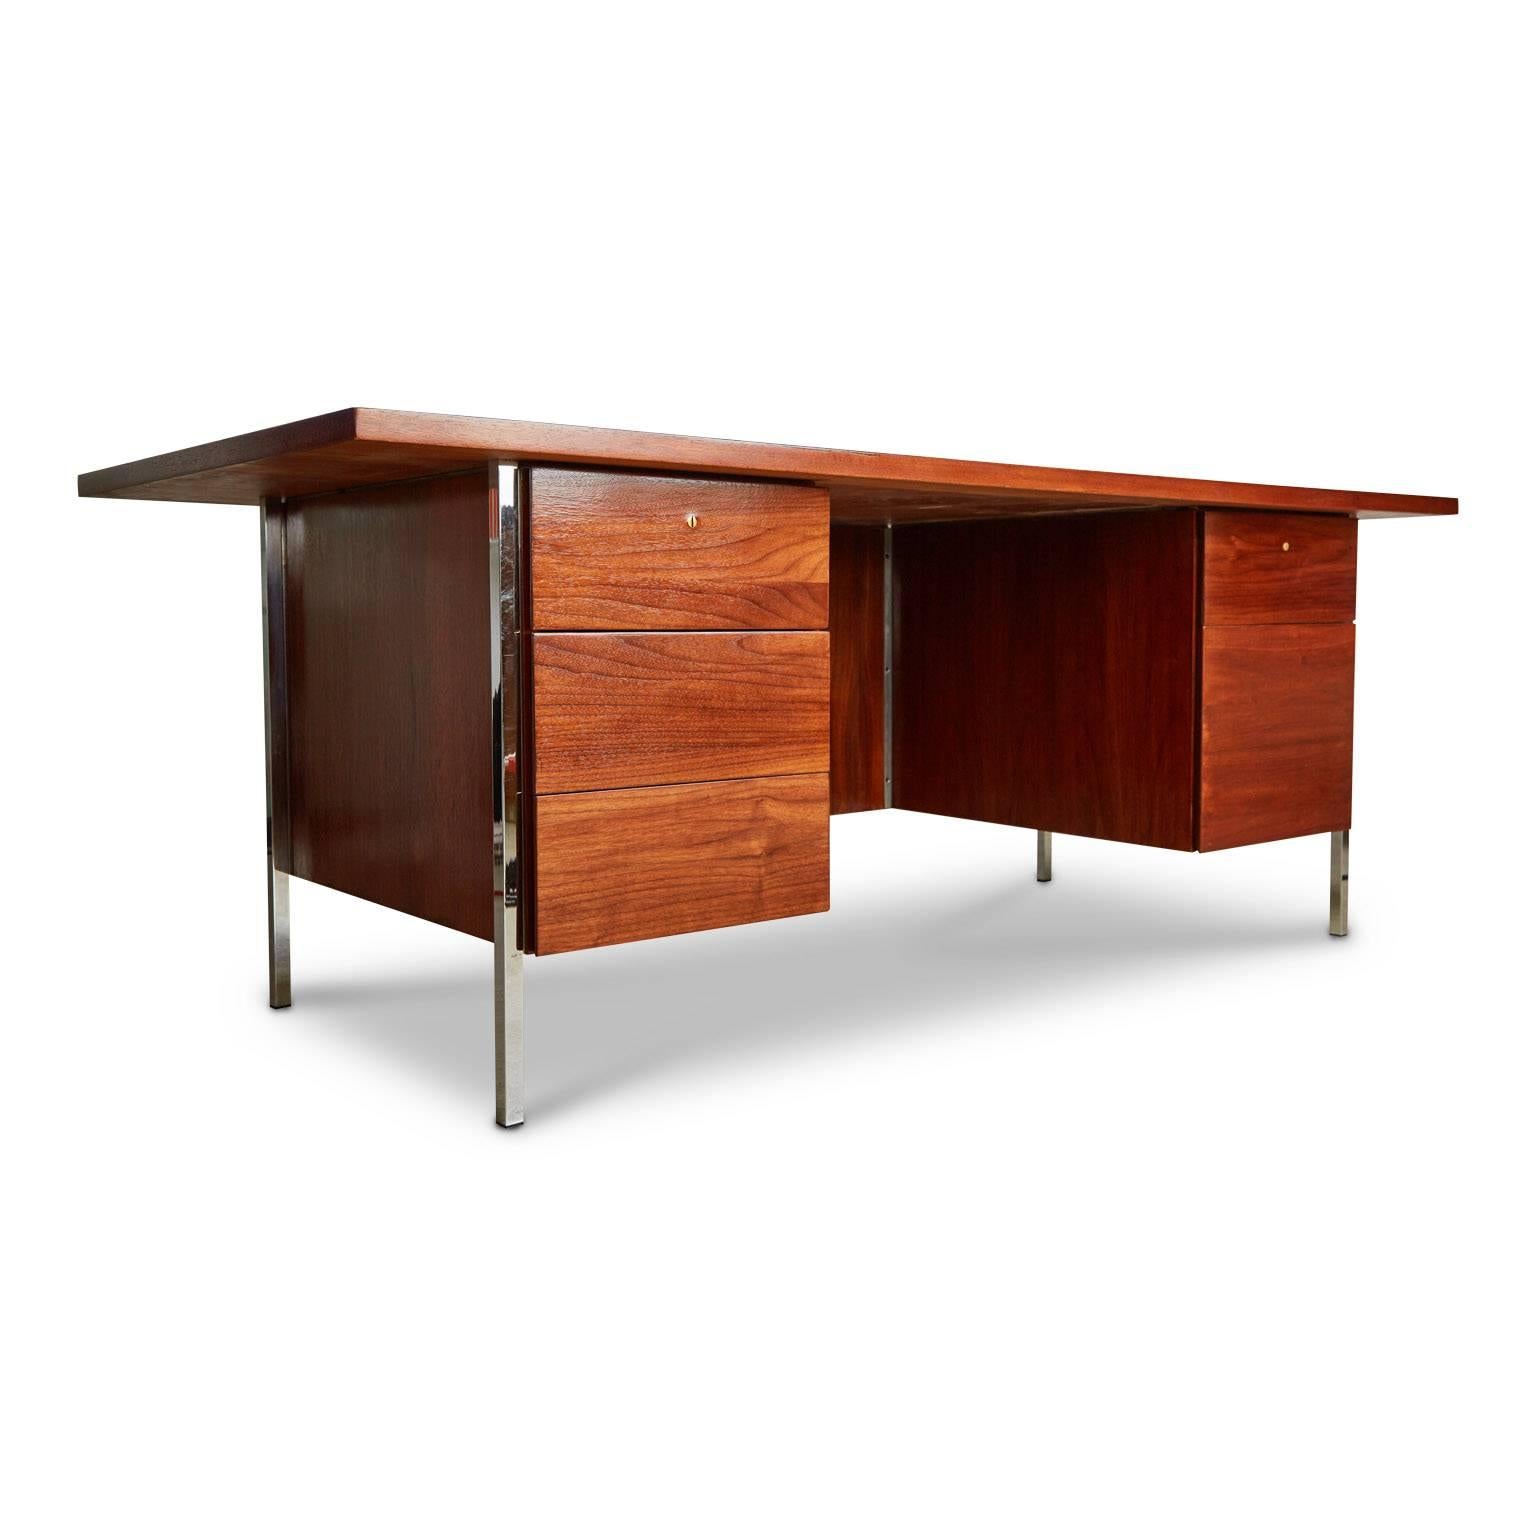 Large and in-charge, newly restored model 1503 executive desk by Florence Knoll for Knoll Associates produced in Walnut between 1952-1956. This desk bares the original early Knoll Associates manufacturing label on the underside. 

Featuring double